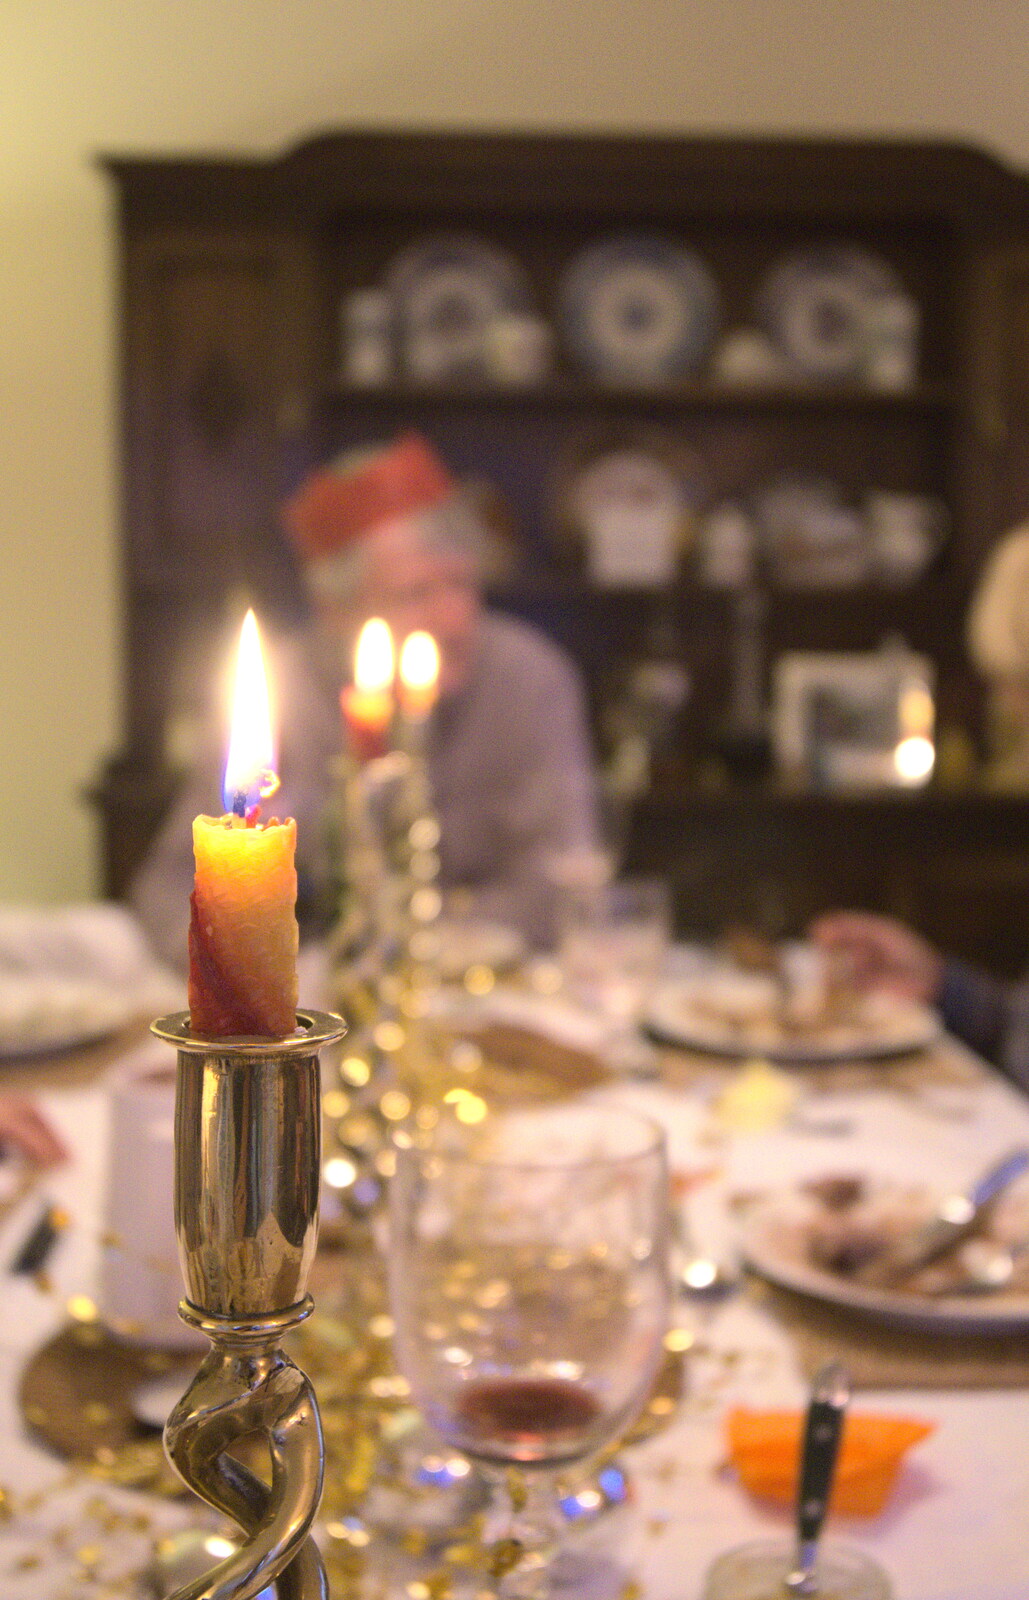 A Christmas candle from Christmas Day in Spreyton, Devon - 25th December 2012